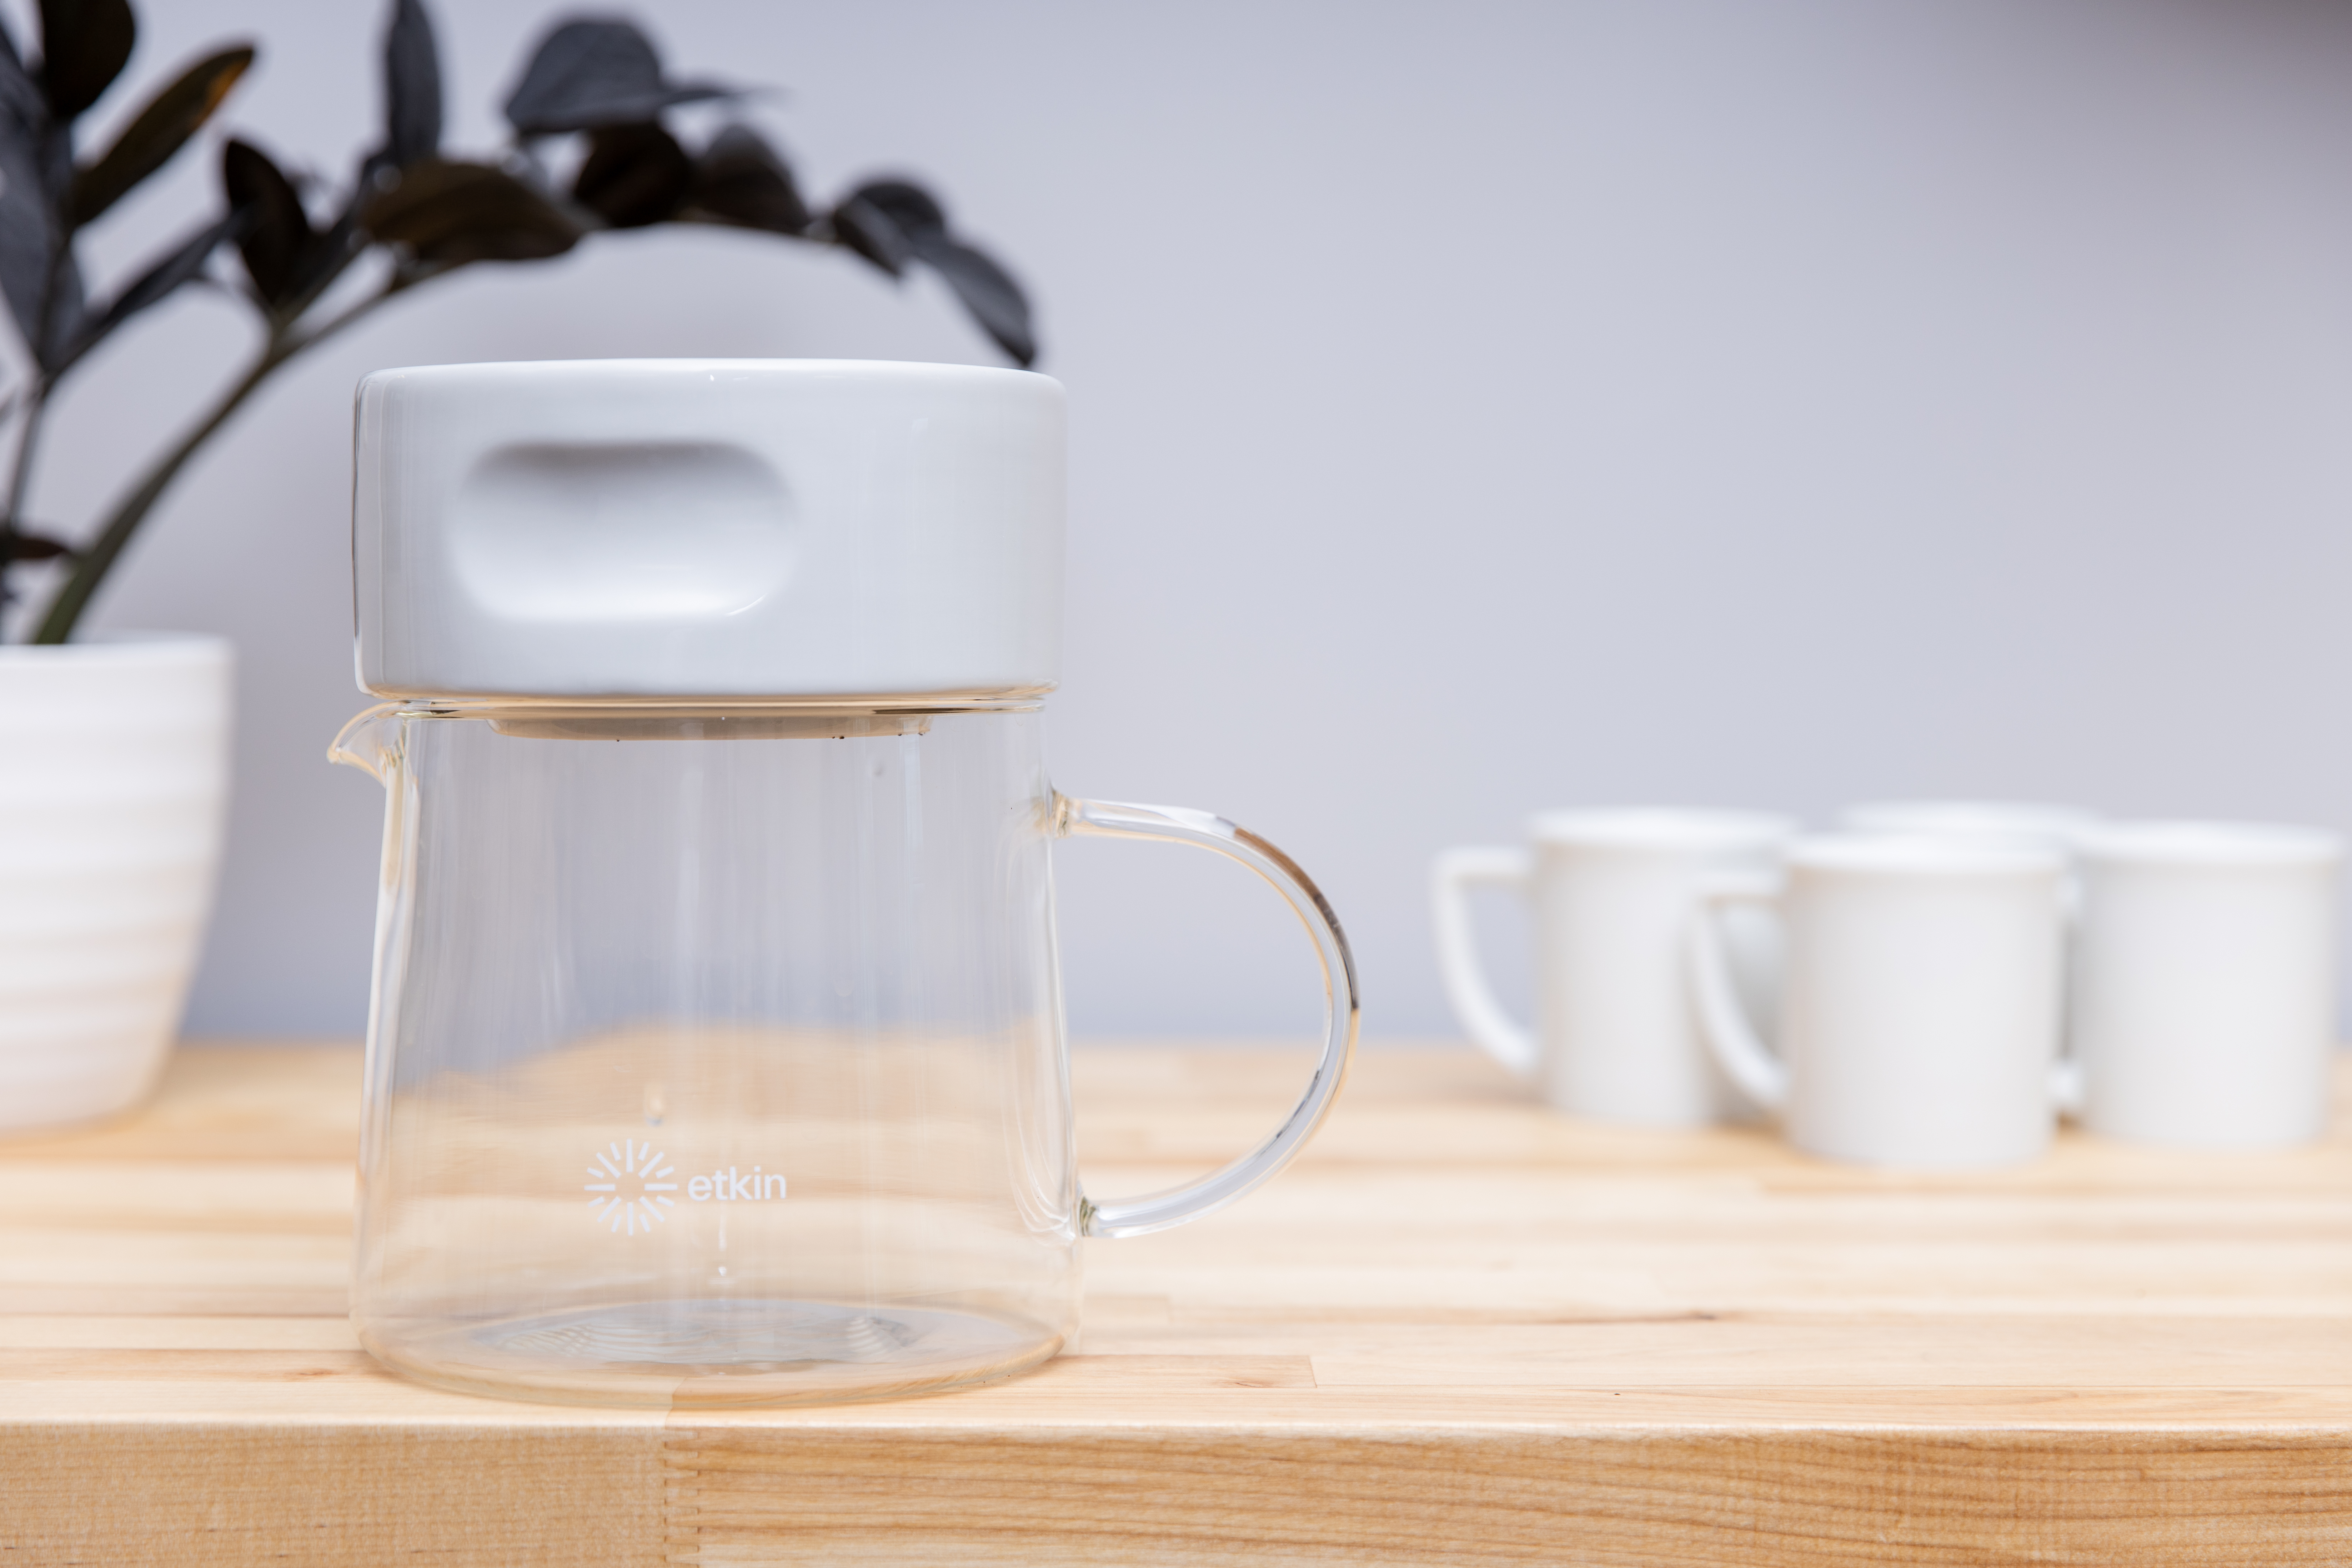 Etkin Goes Small With A New 2-Cup Dripper